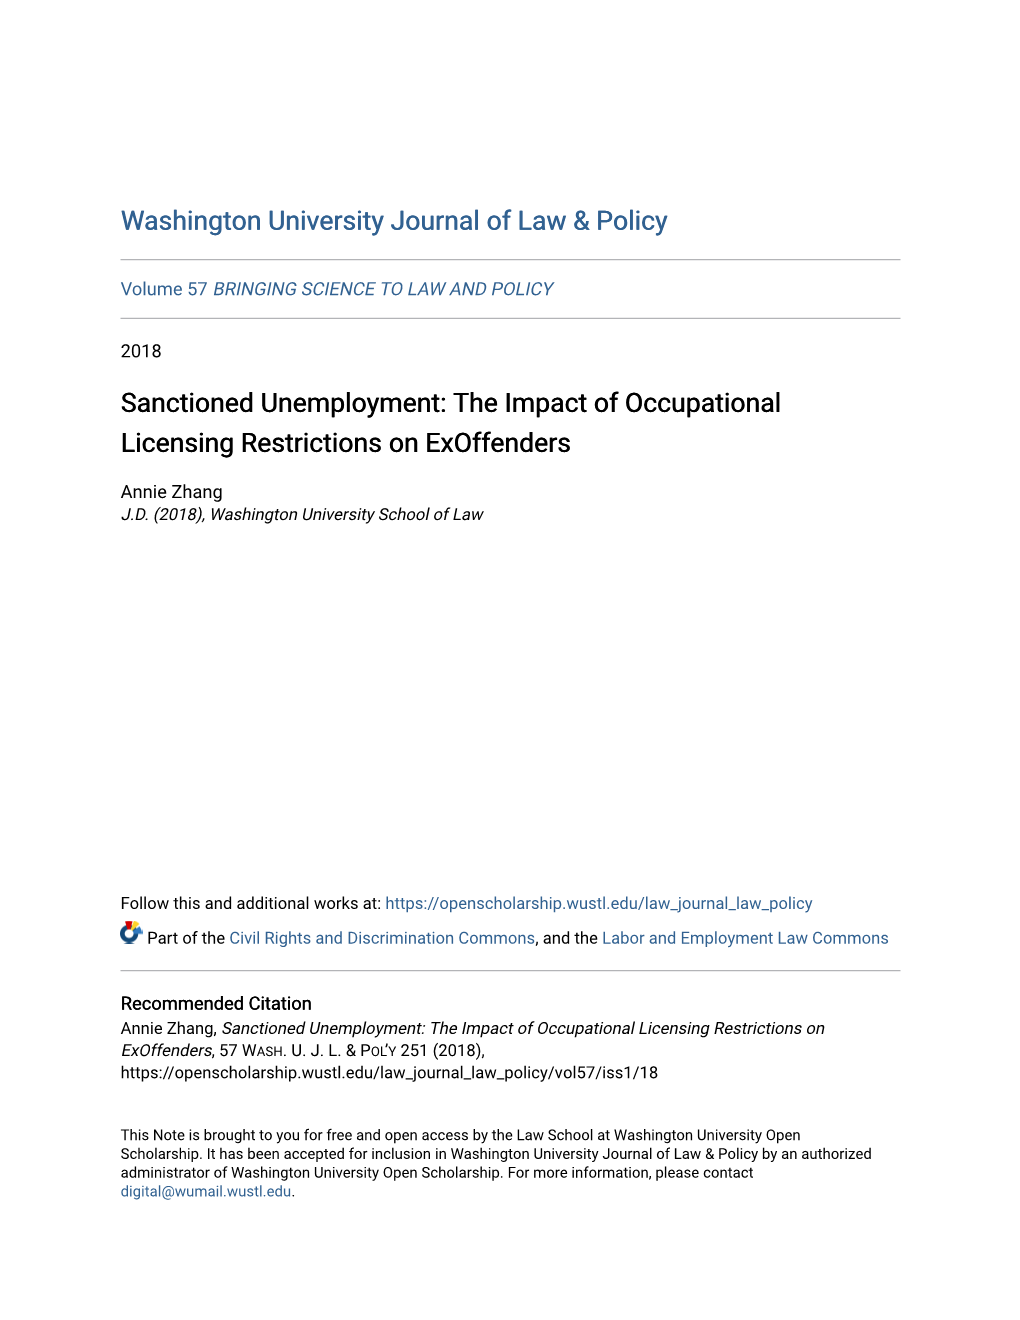 Sanctioned Unemployment: the Impact of Occupational Licensing Restrictions on Exoffenders